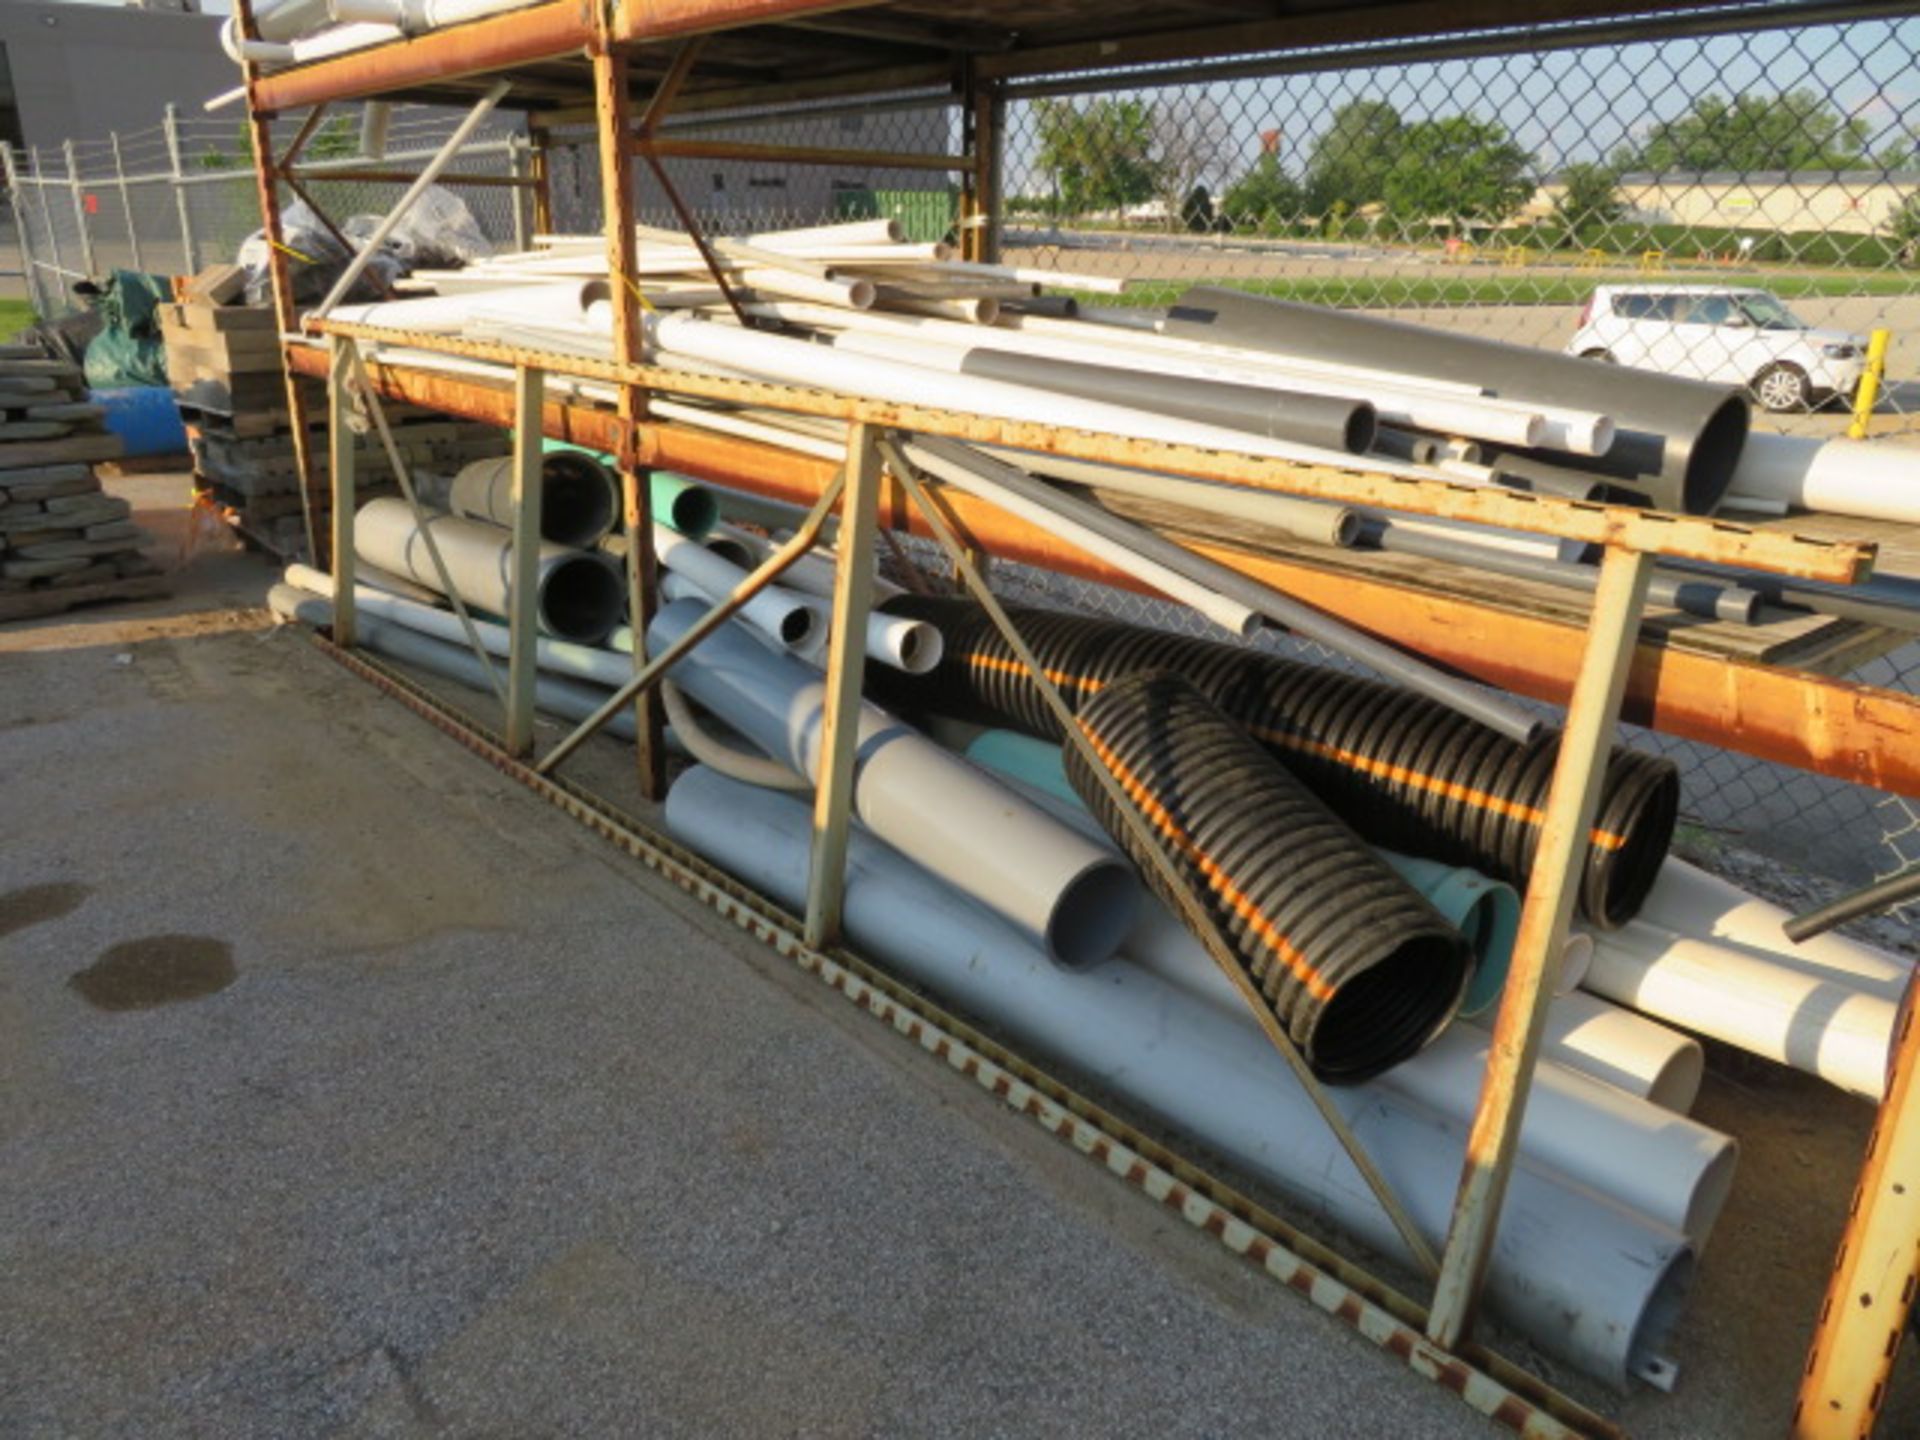 LOT CONSISTING OF: 3-tier rack loaded with various size & length tube & pipe, large pipe, gas tubing